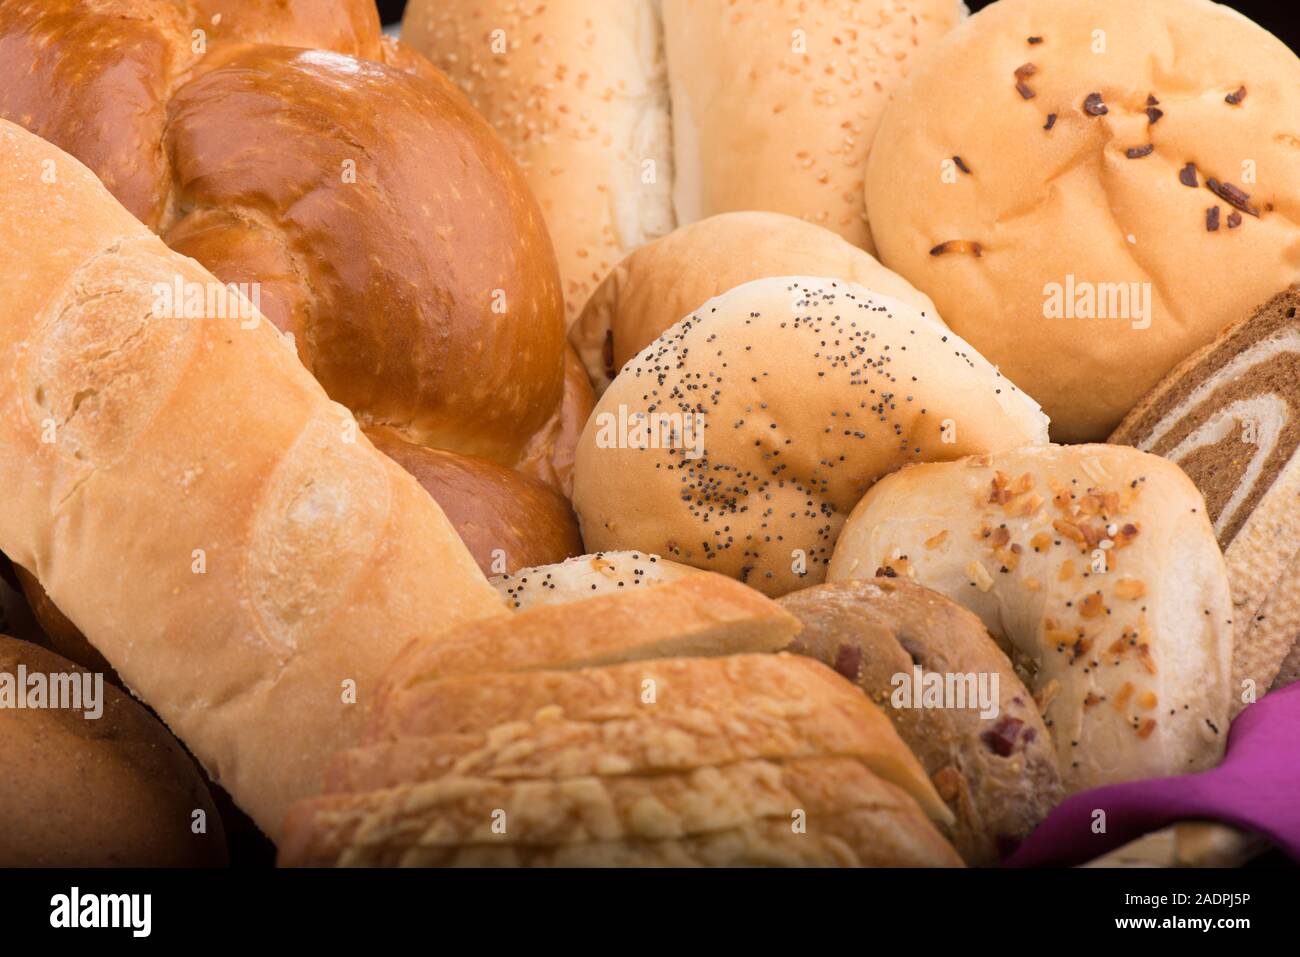 Assortment of Freshly baked bread and other bakery items Stock Photo